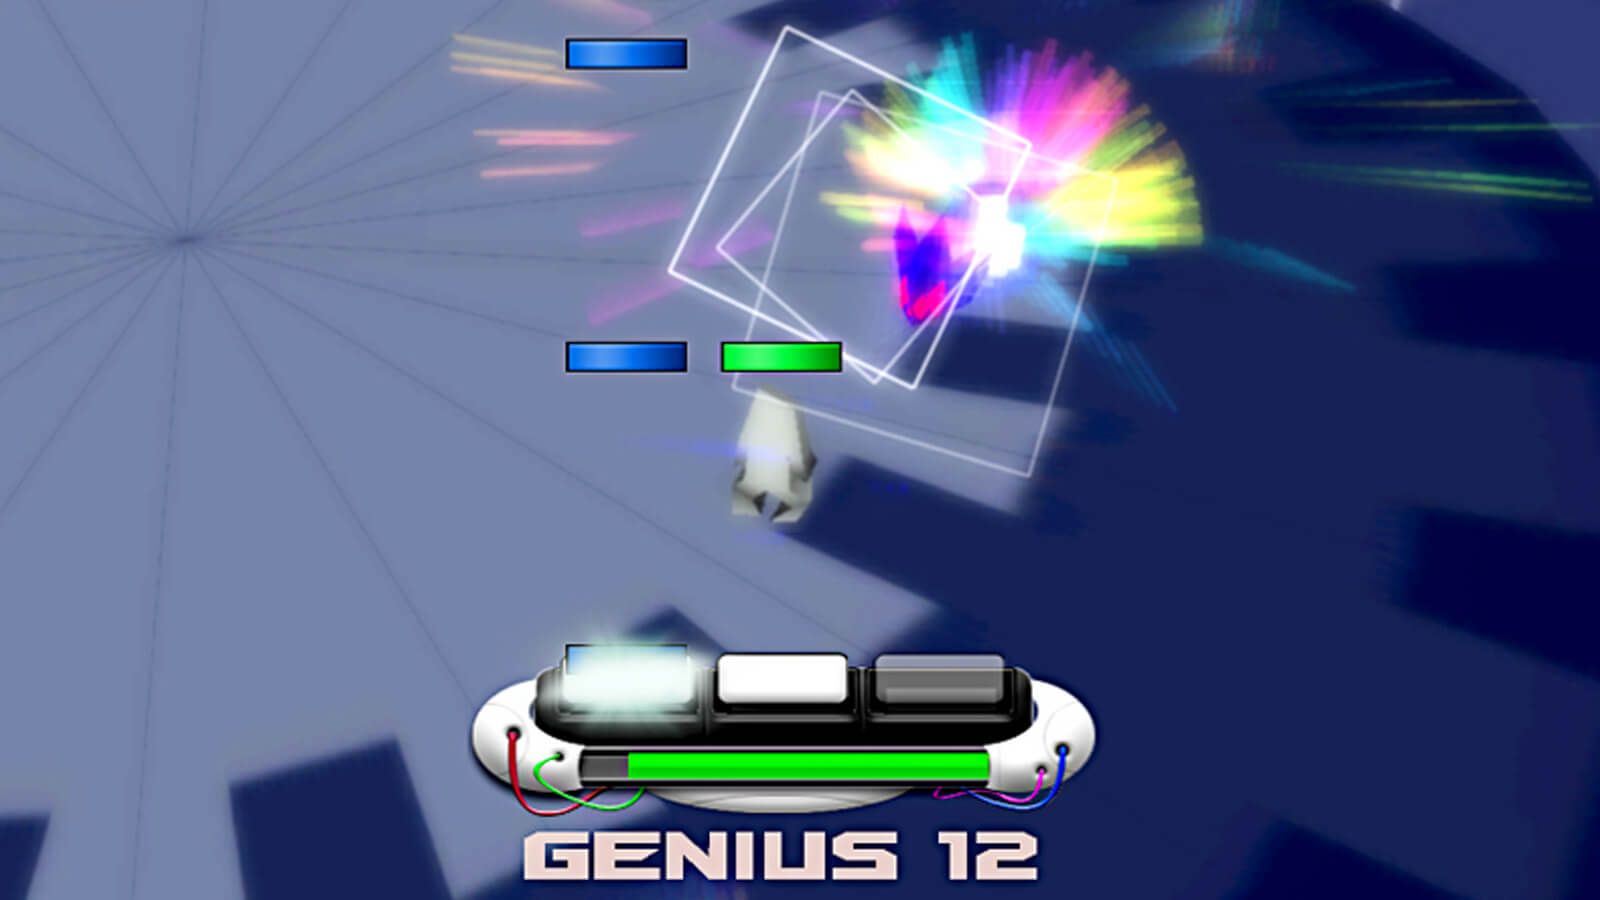 Two blue dashes and a green dash fall towards a console with the word "GENIUS 12" below it.